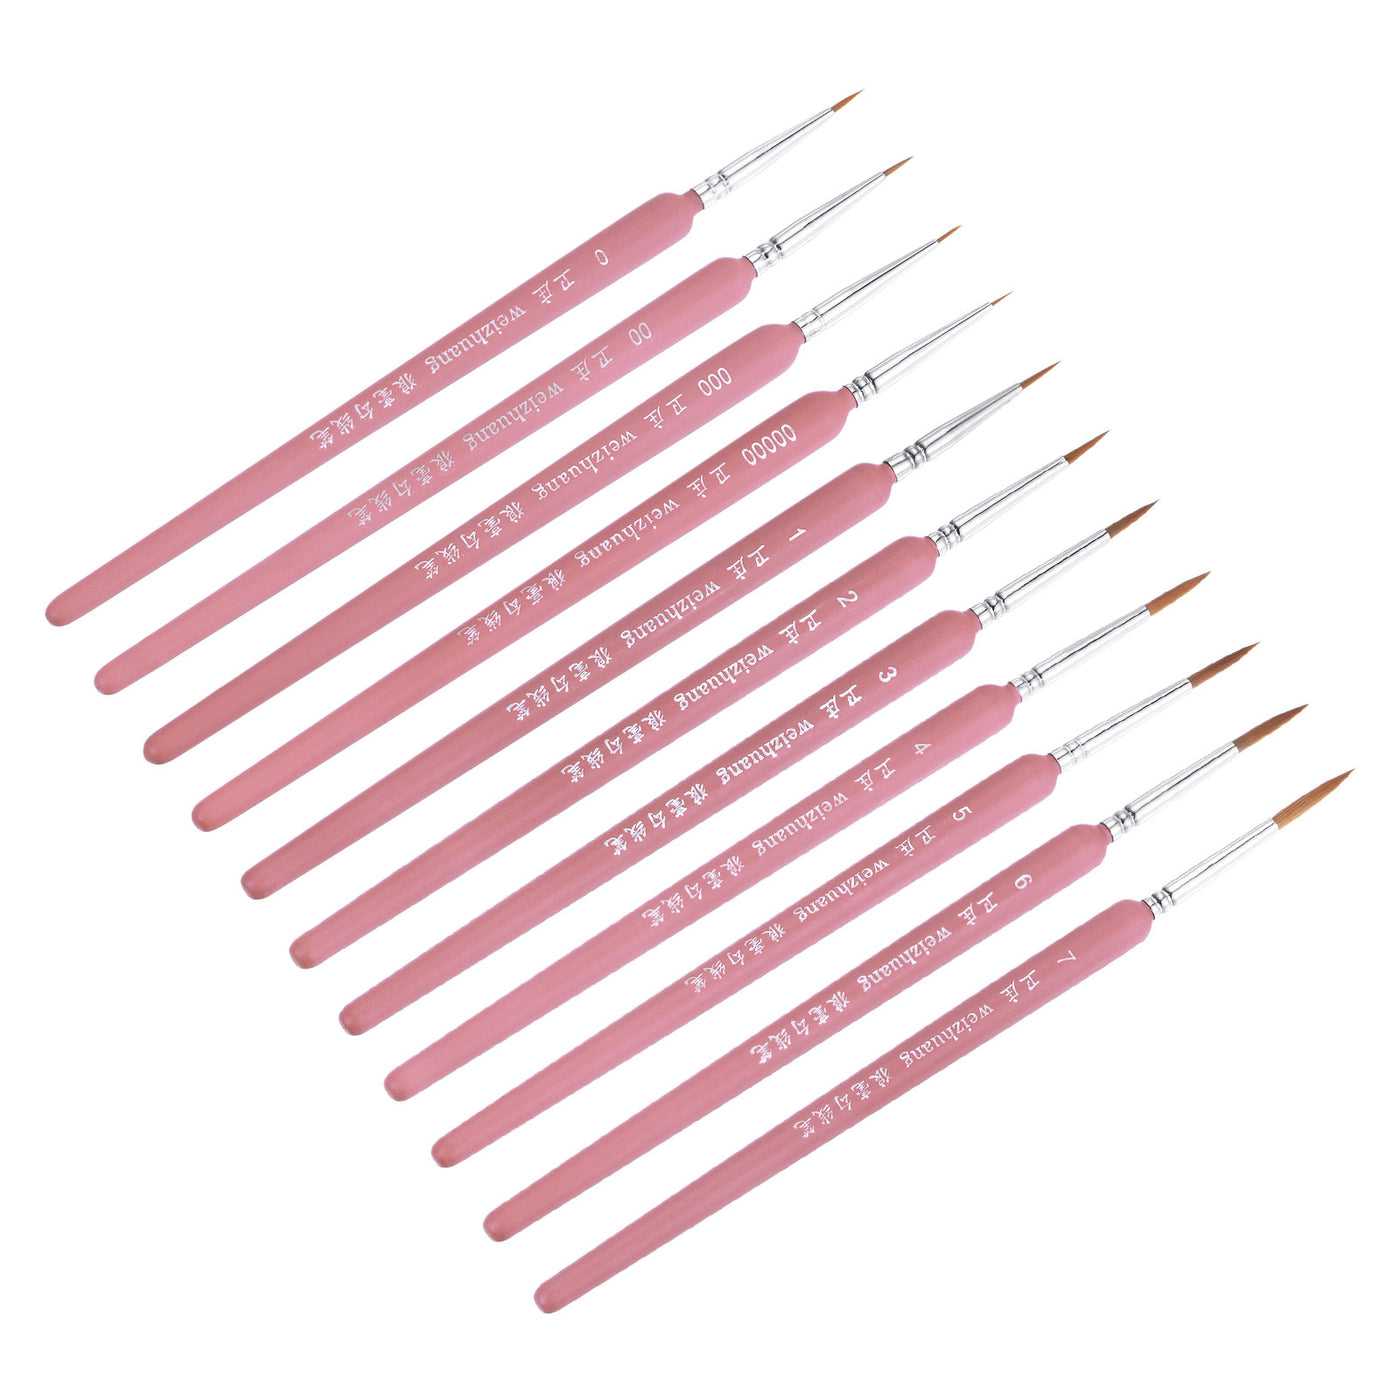 uxcell Uxcell Detailing Paint Brush Set Pointed Bristle Pink Wood Handle 1 Set (11Pcs)